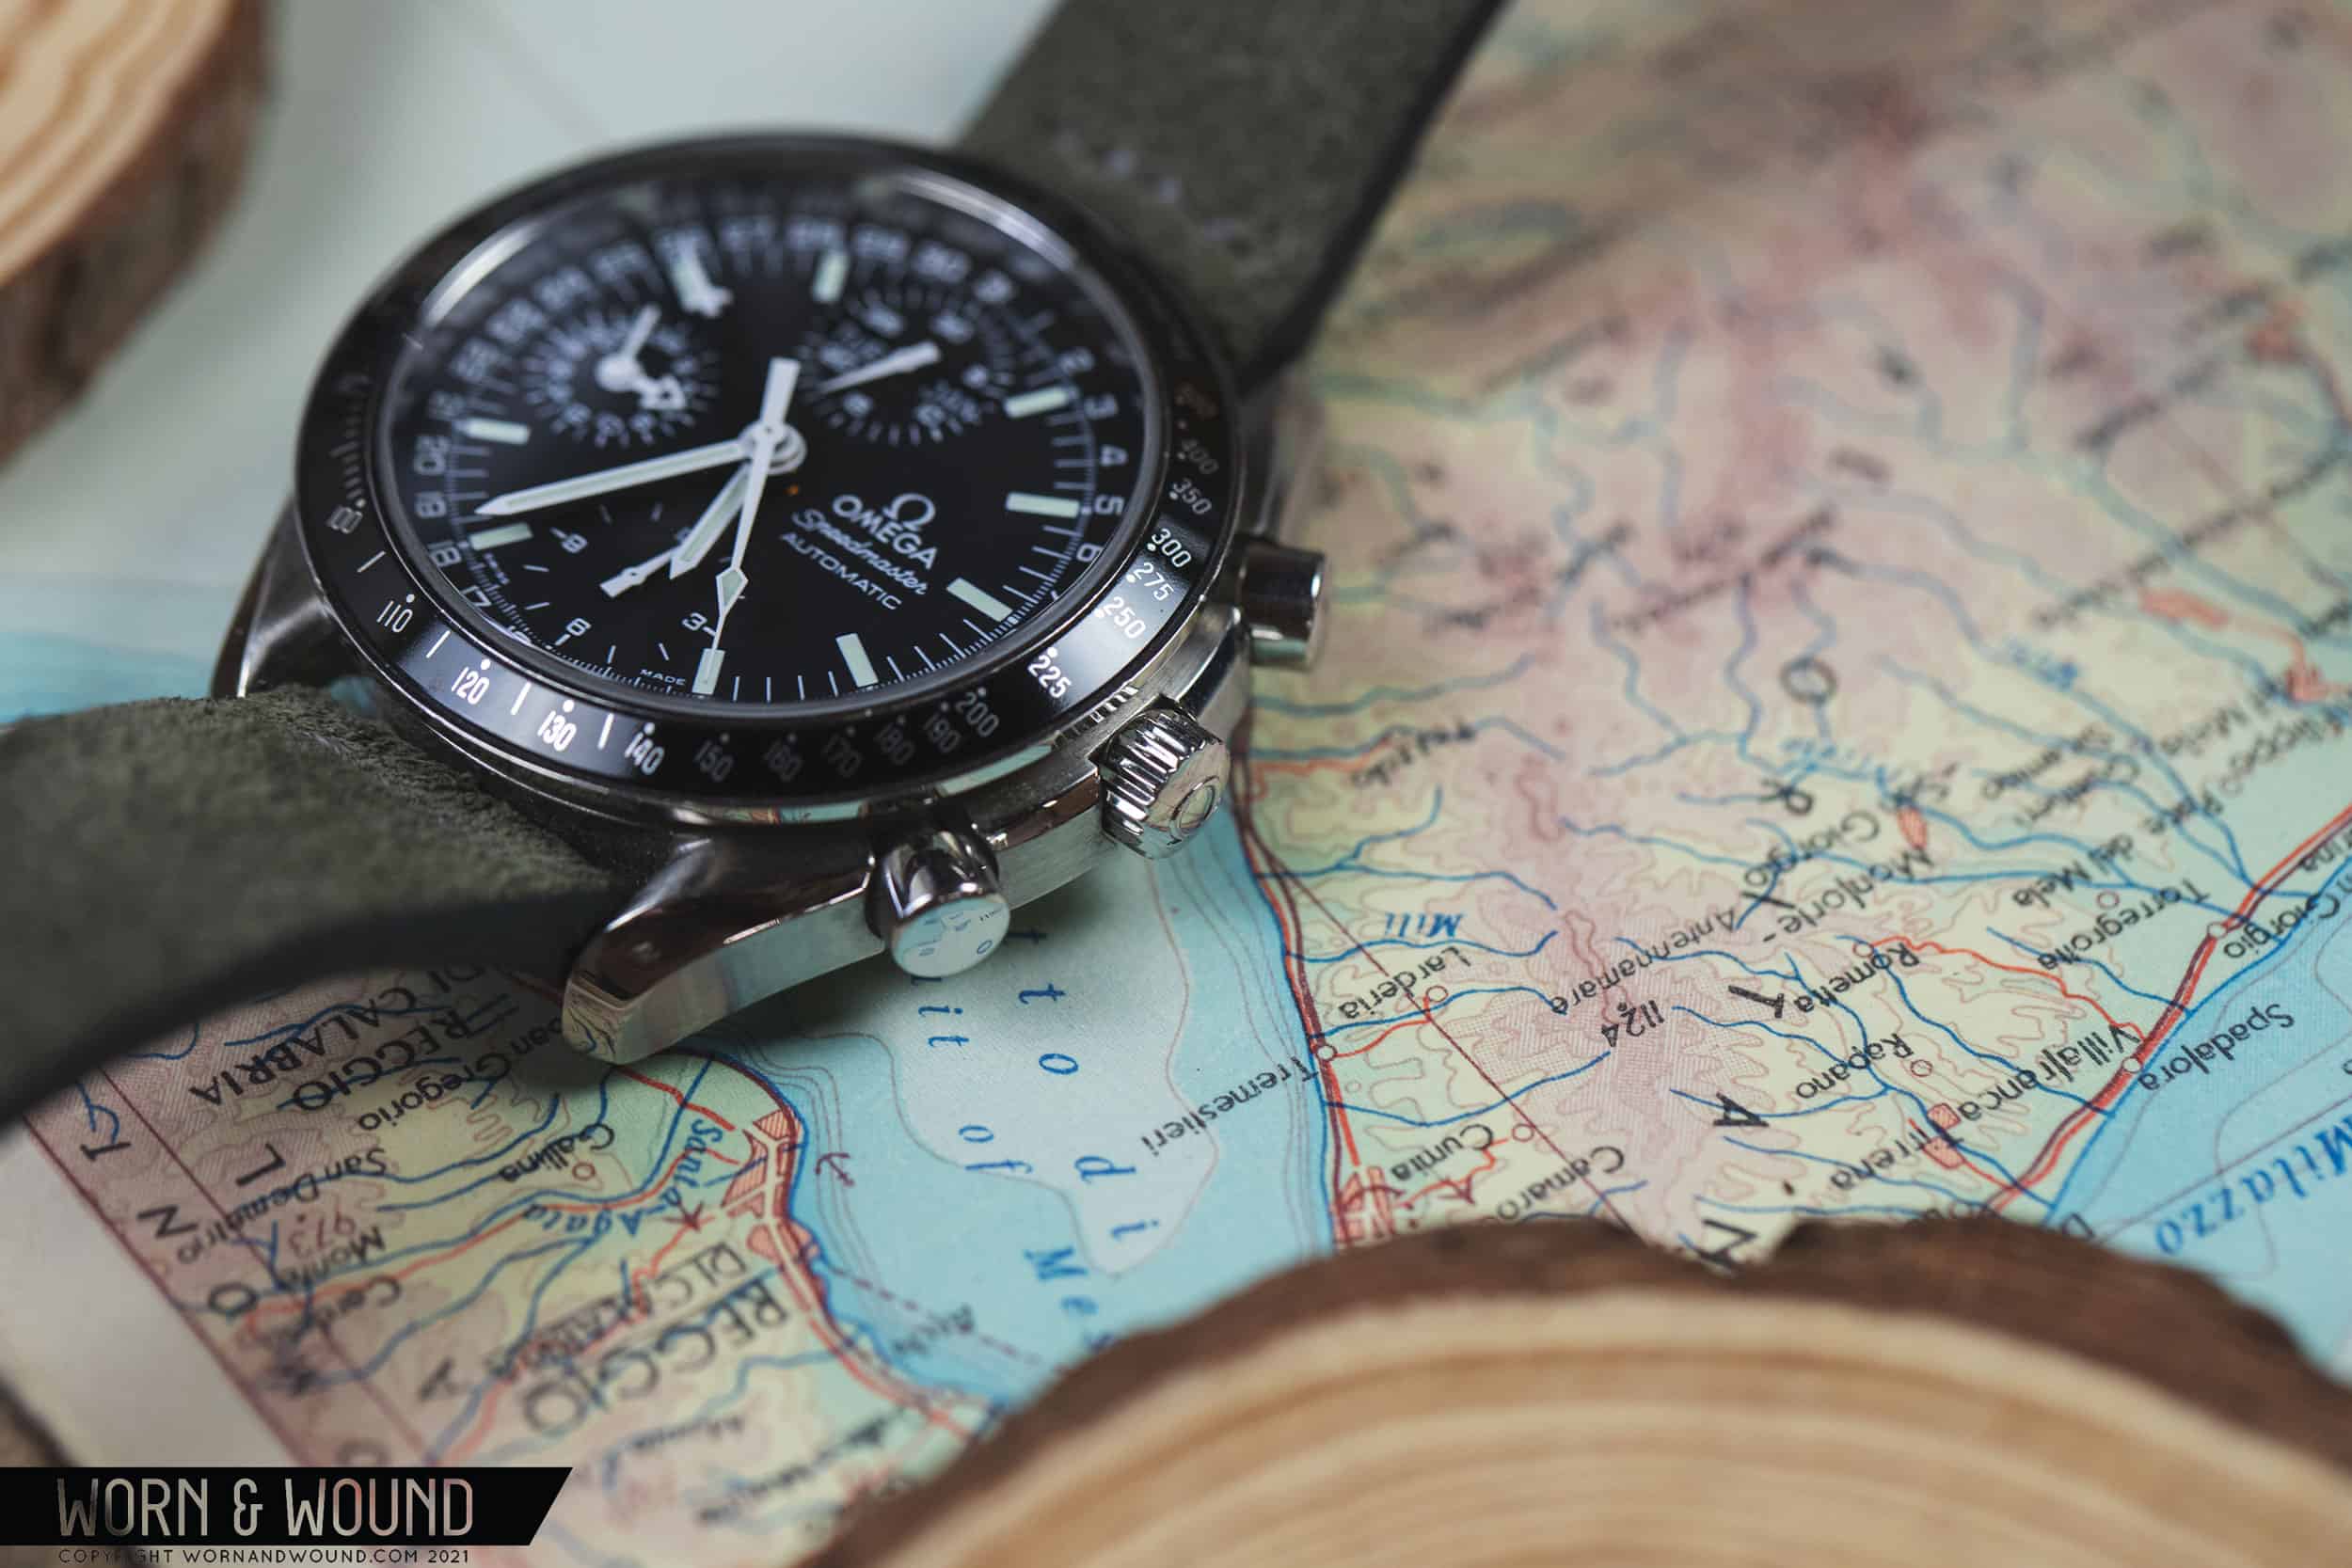 Owner review: Omega Speedmaster Moonwatch Professional - FIFTH WRIST